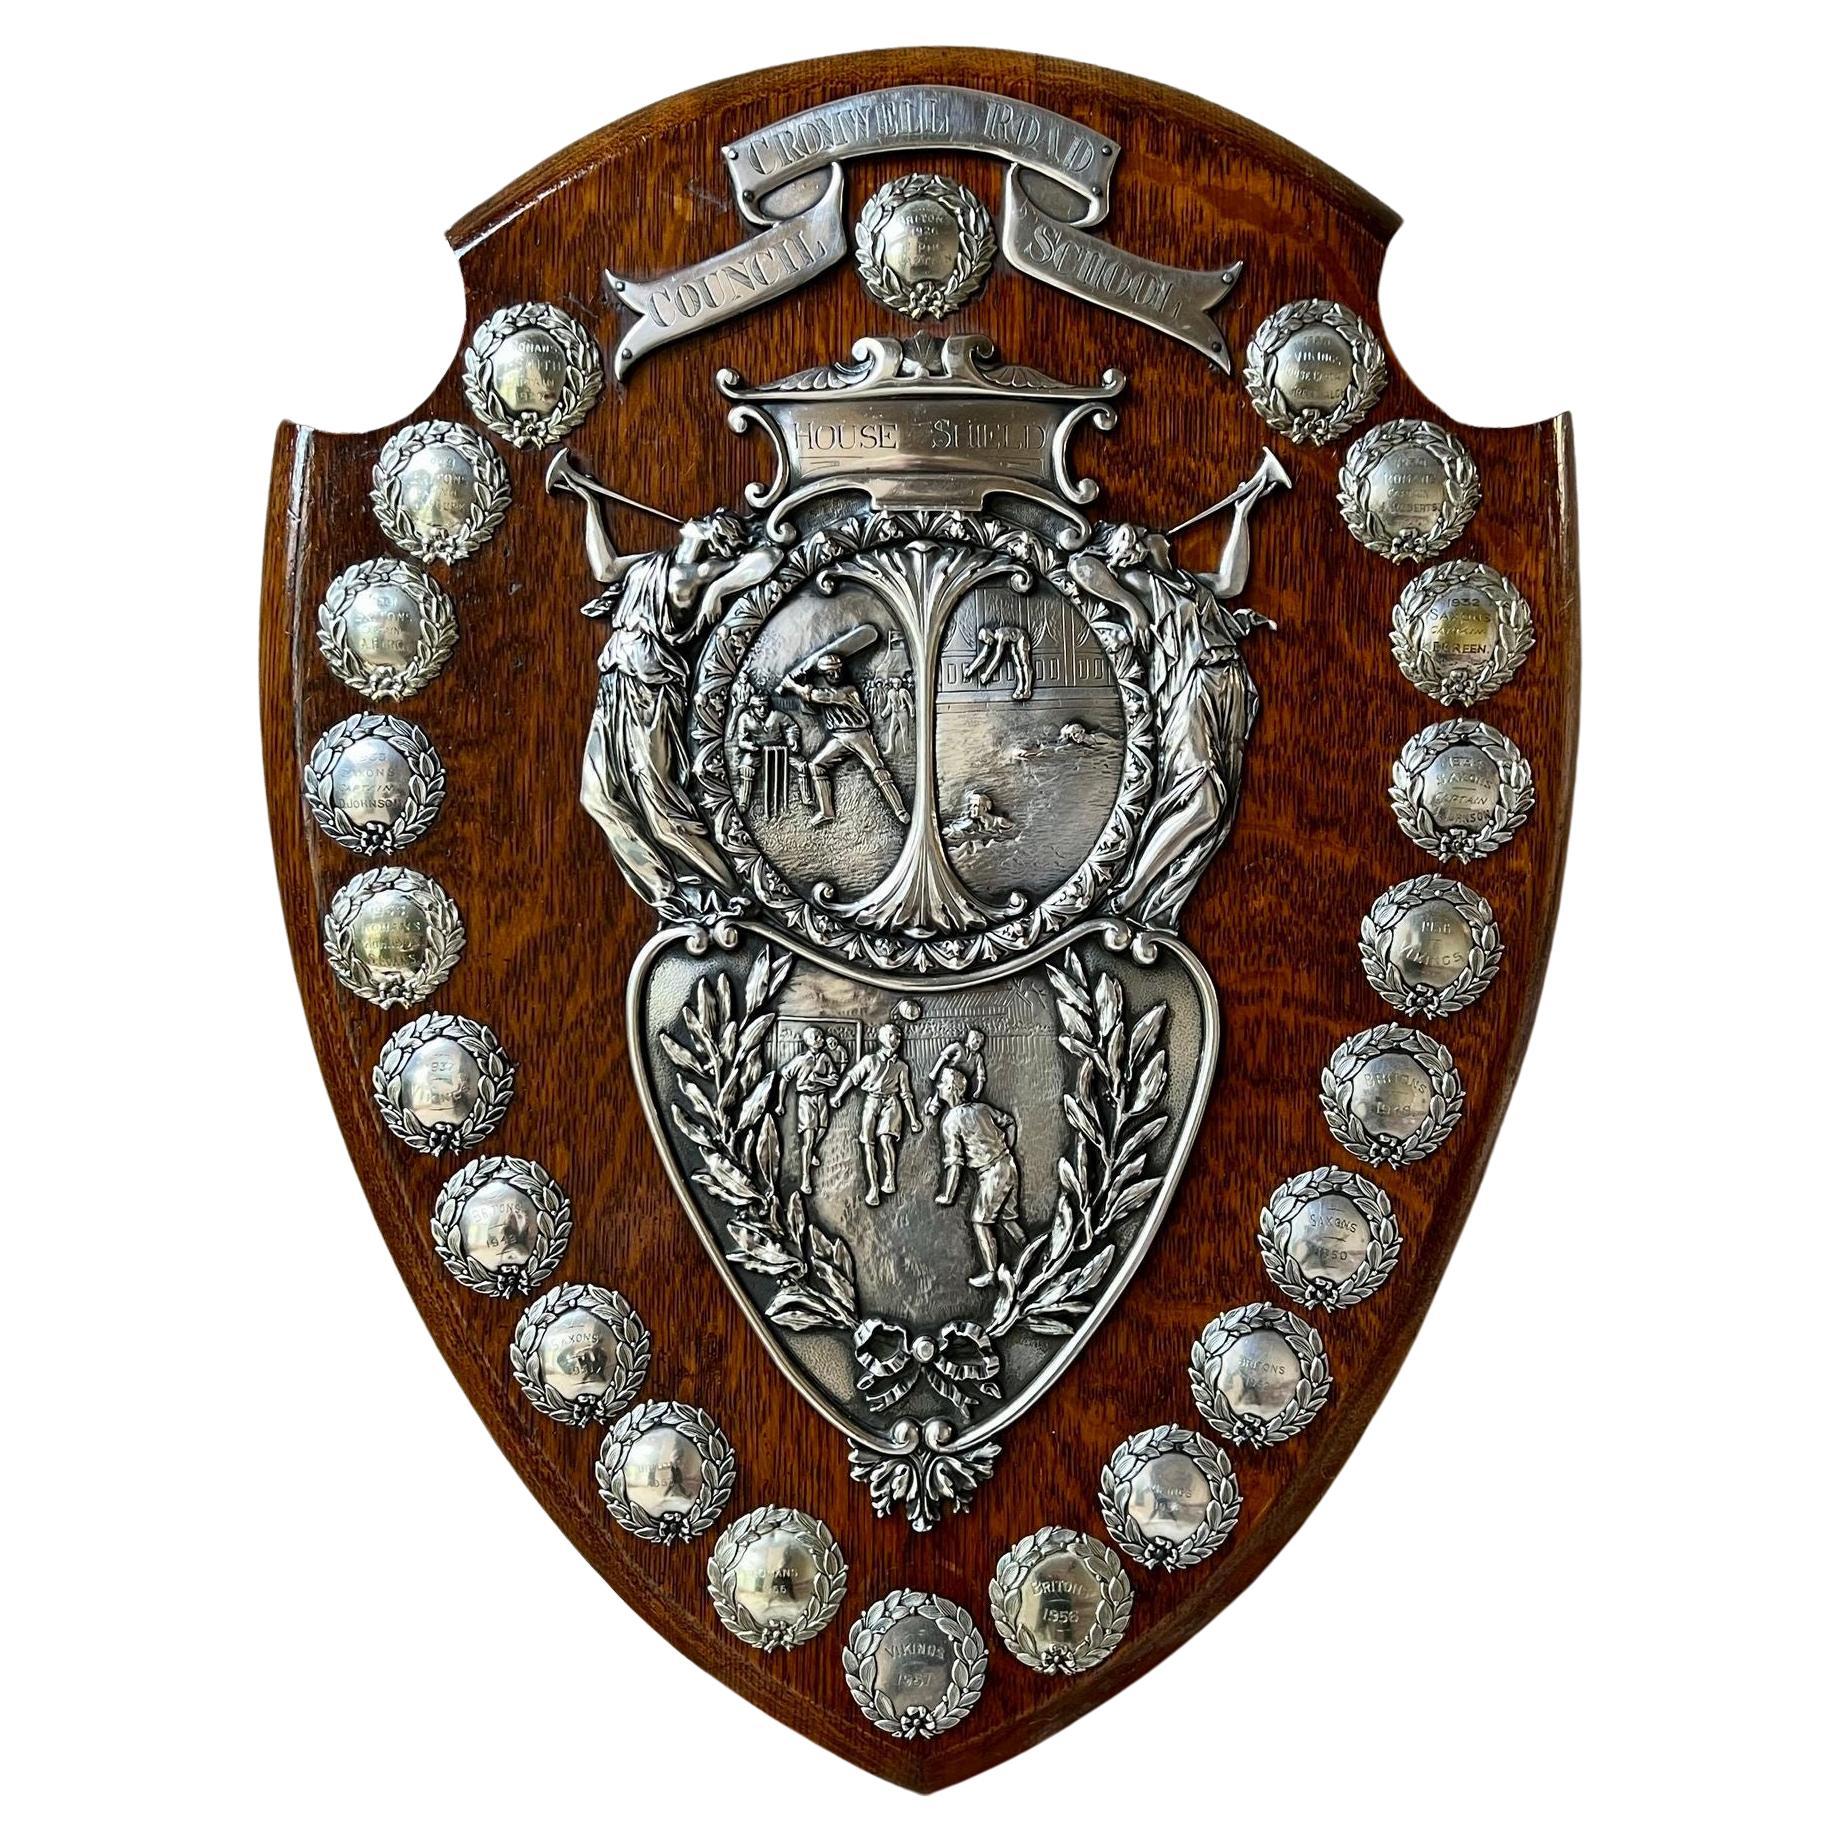 Antique English Trophy Baseball Soccer Swimming Award Plaque Repousse c1926 For Sale